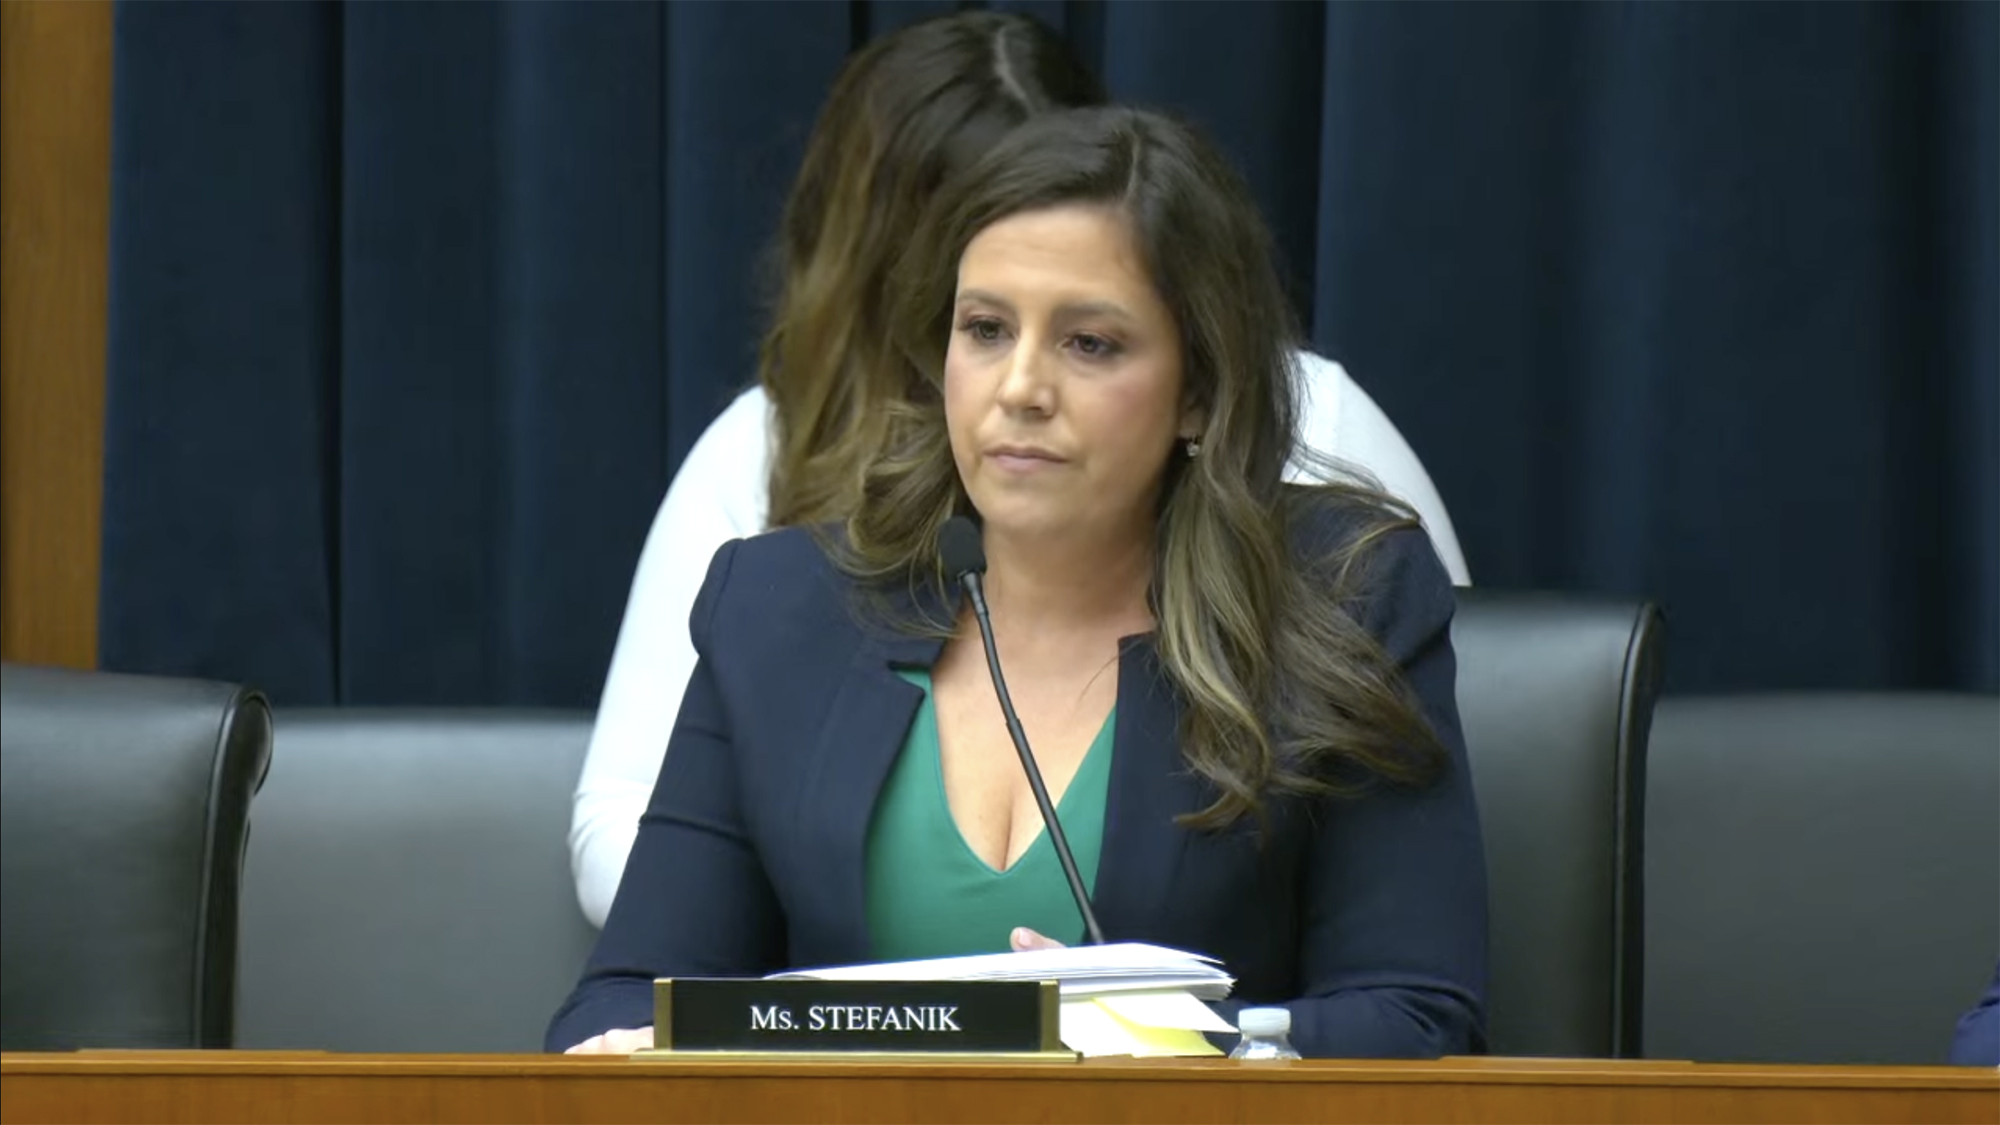 Rep. Elise Stefanik at the House Committee on Education and the Workforce hearing about antisemitism on university campuses, today in Washington, DC. 